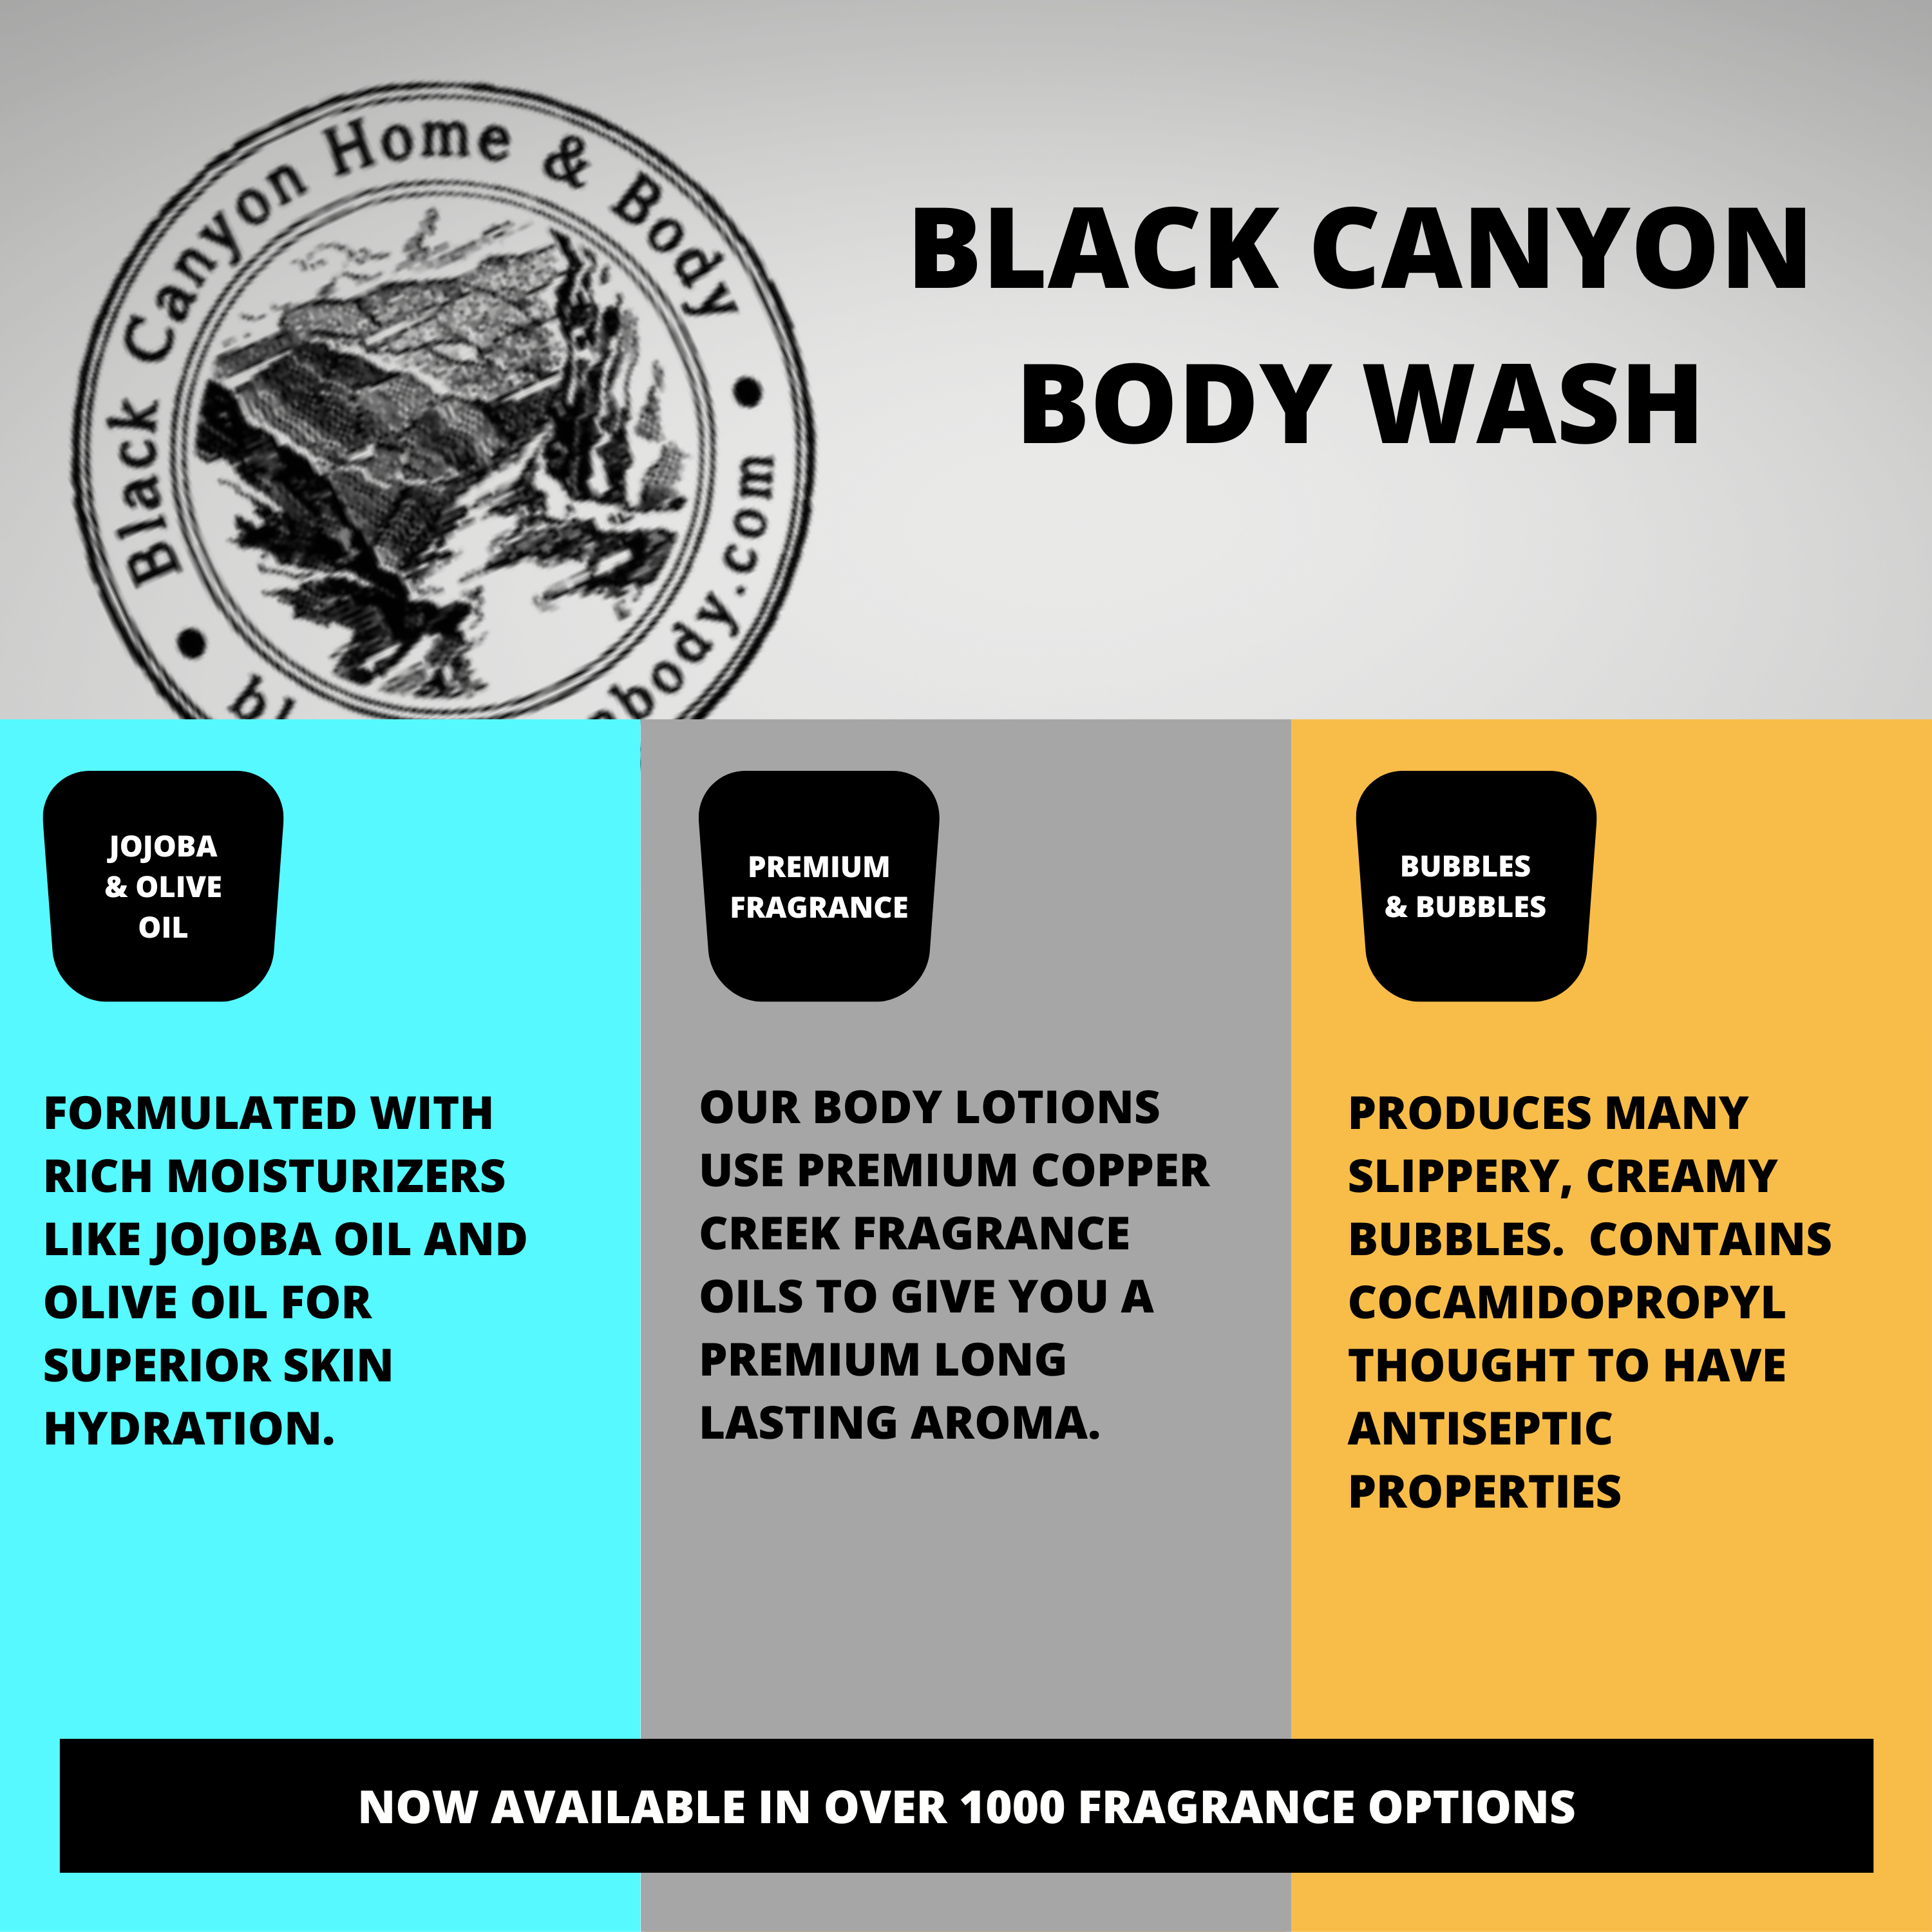 Black Canyon Peanut Butter Cups Scented Luxury Body Wash